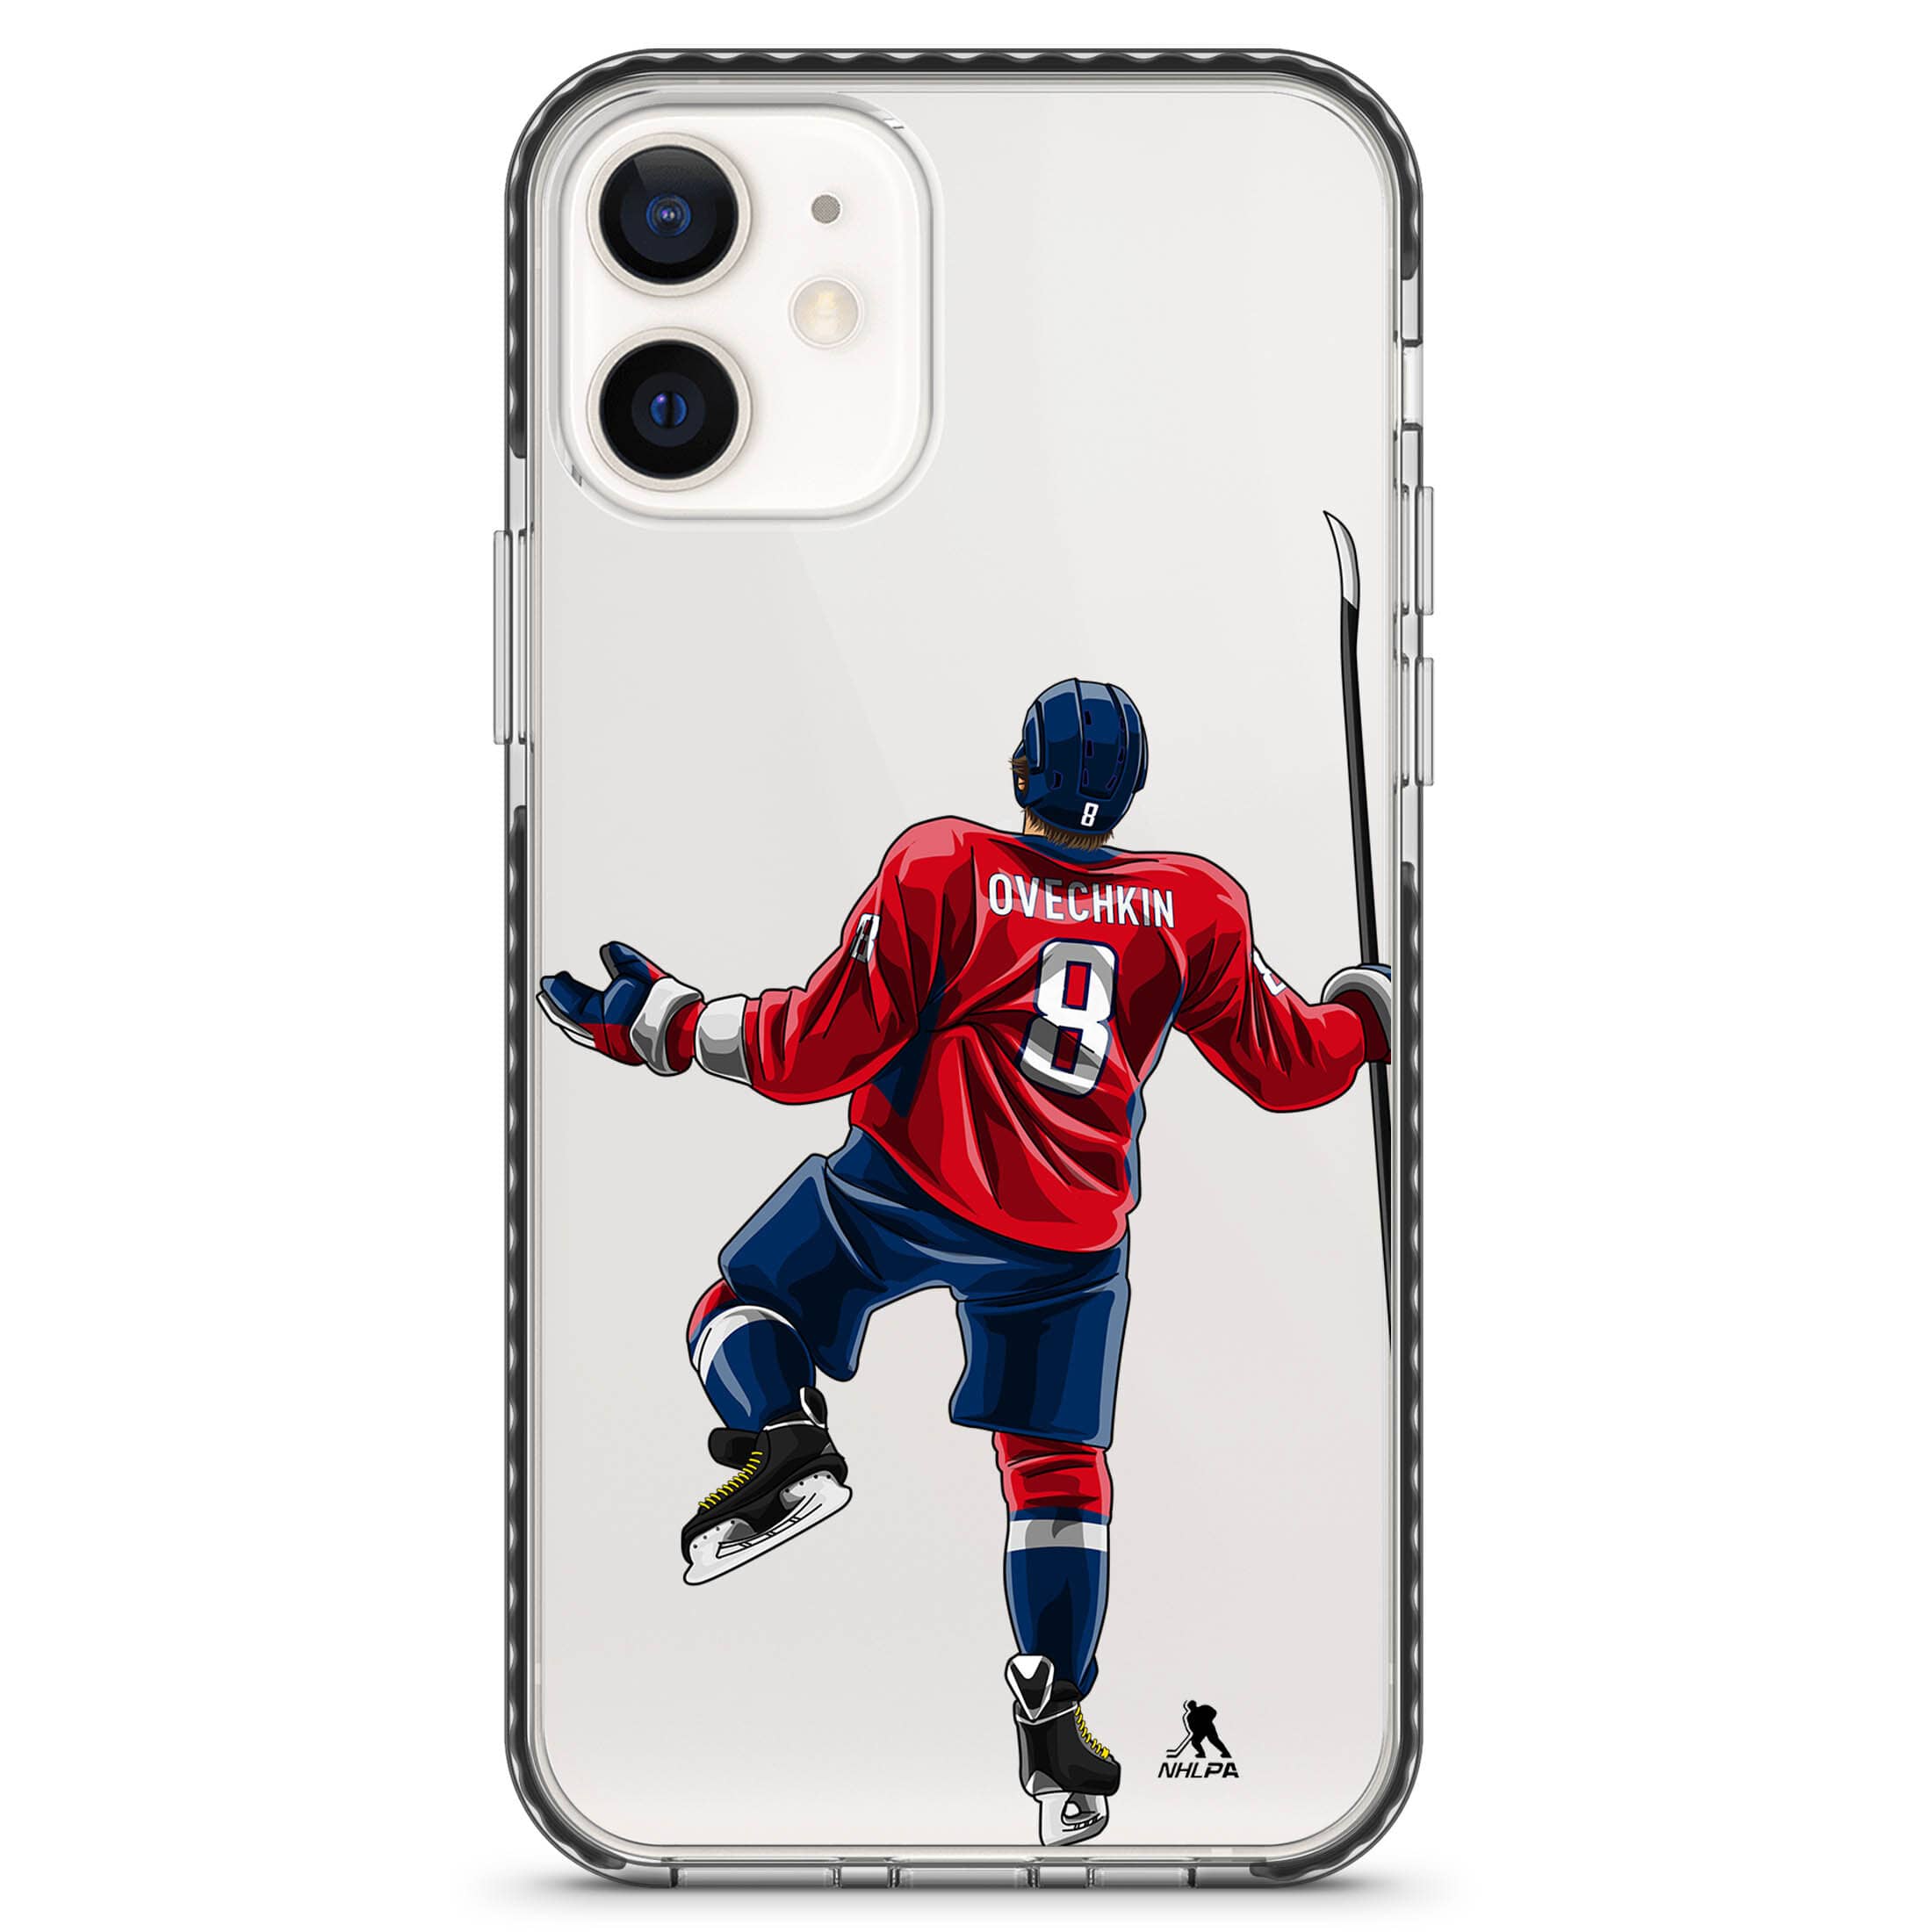 Ovechkin Celly Clear Series 2.0 Phone Case